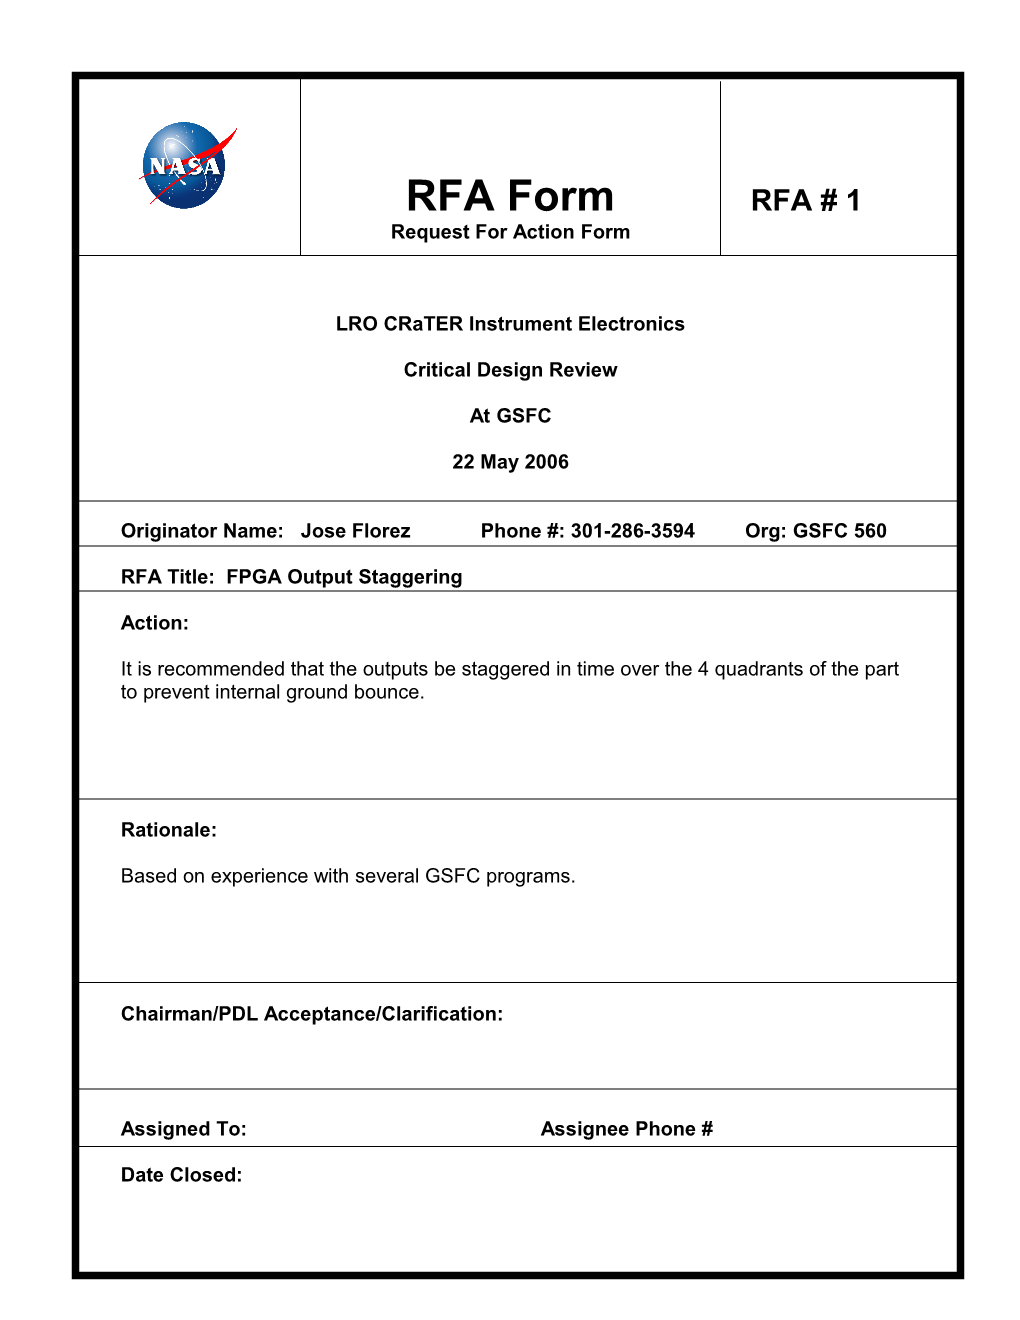 NGST SBC Delta Requirements Review RFA Form